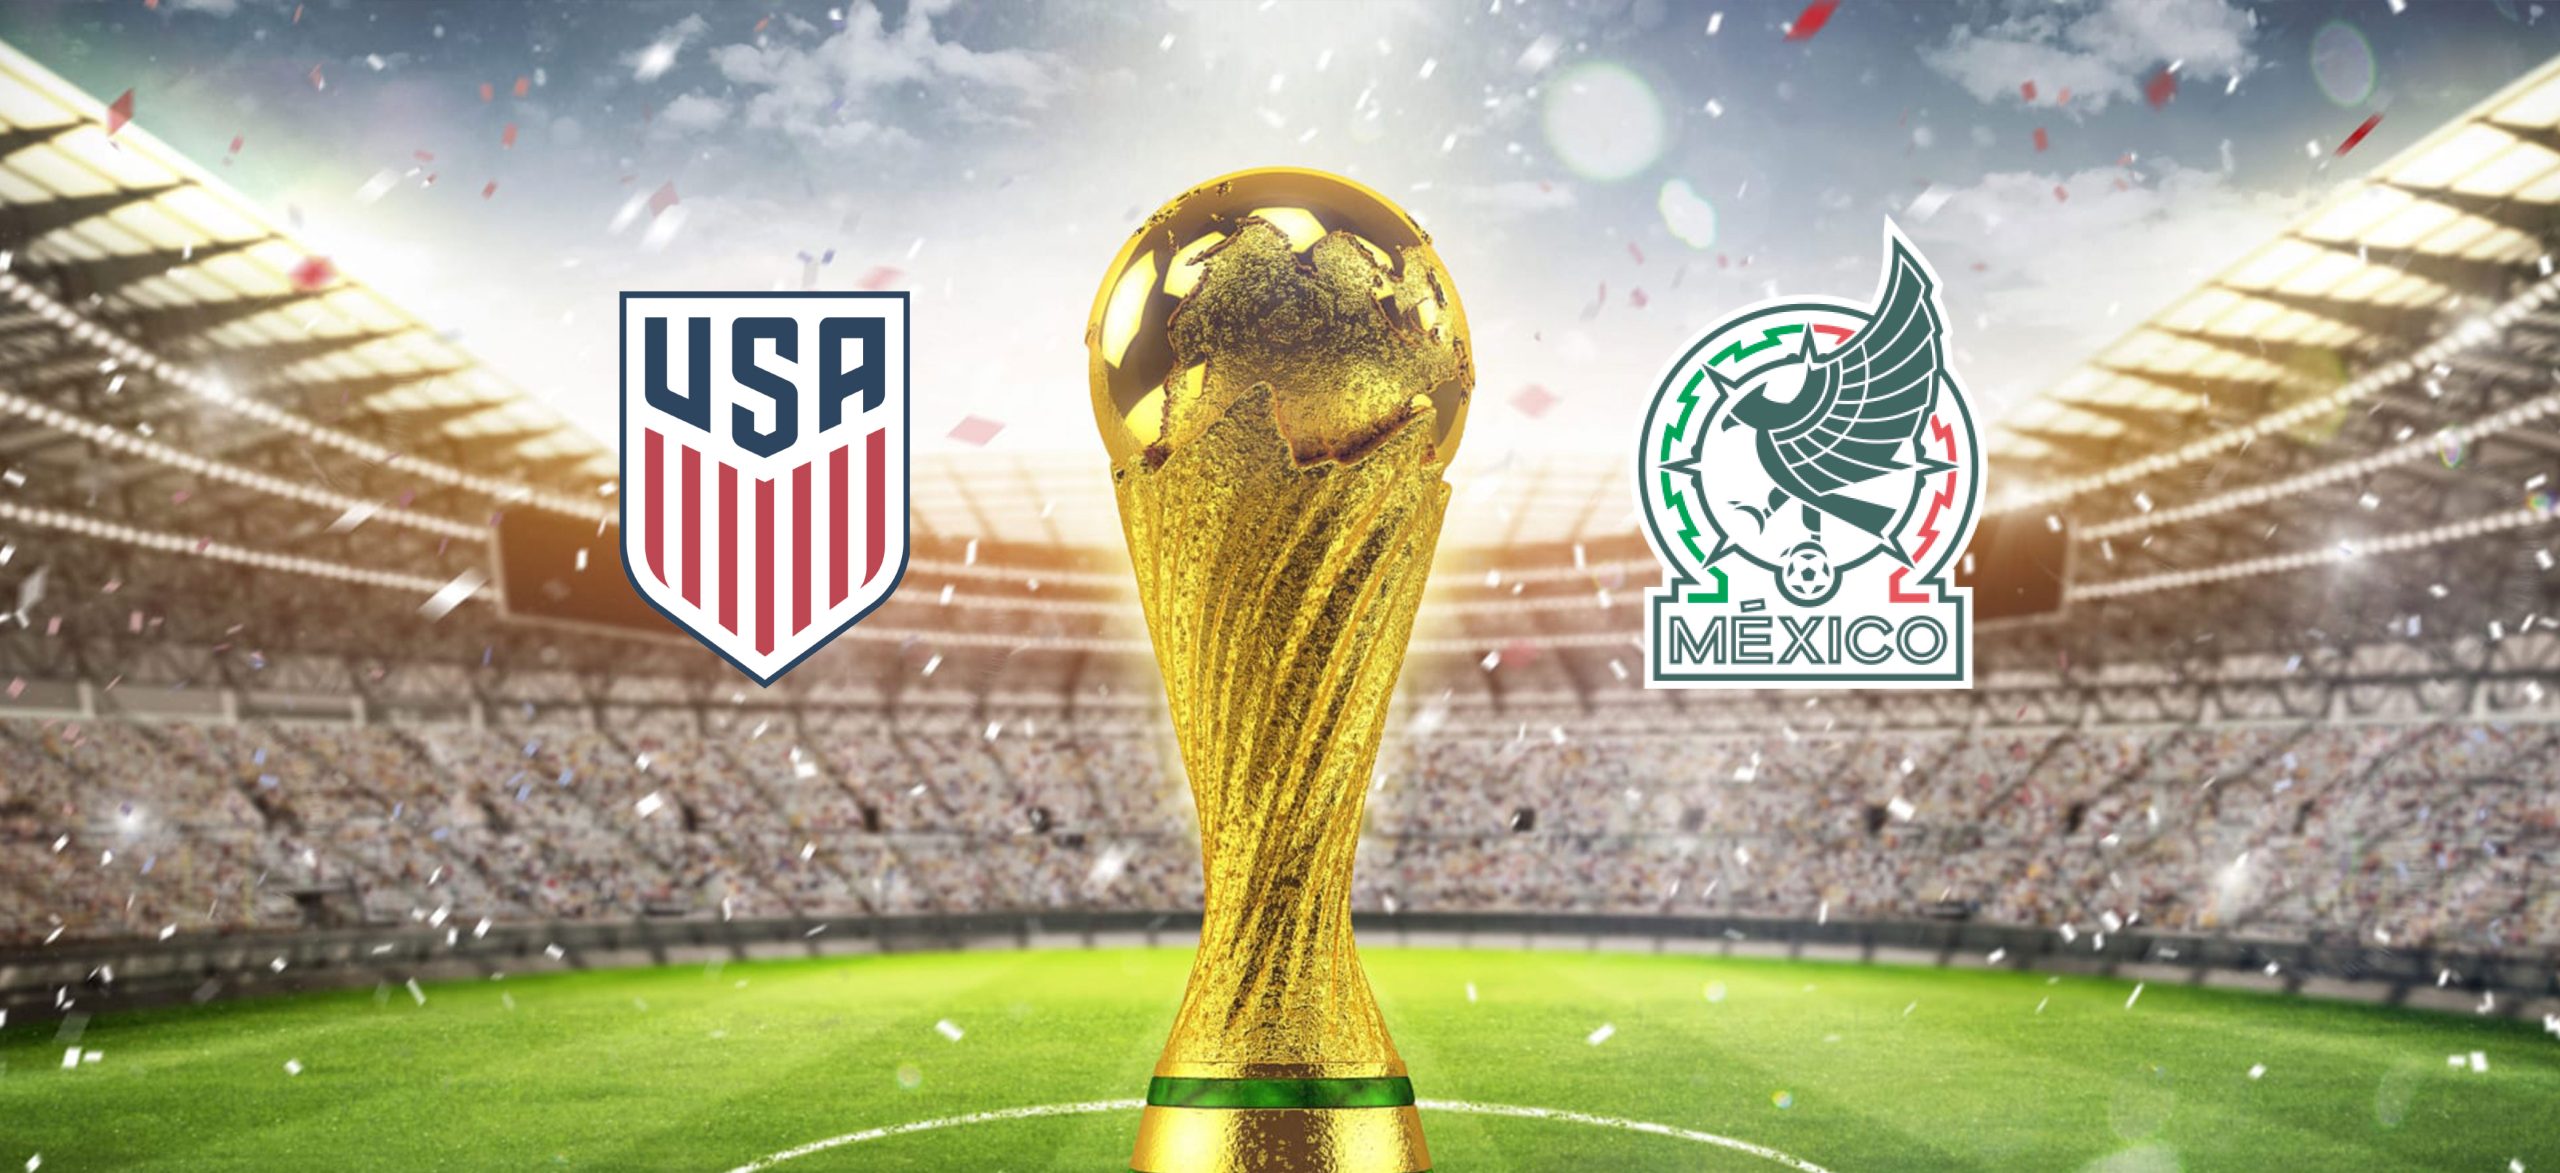 Background image for USA vs MEXICO 